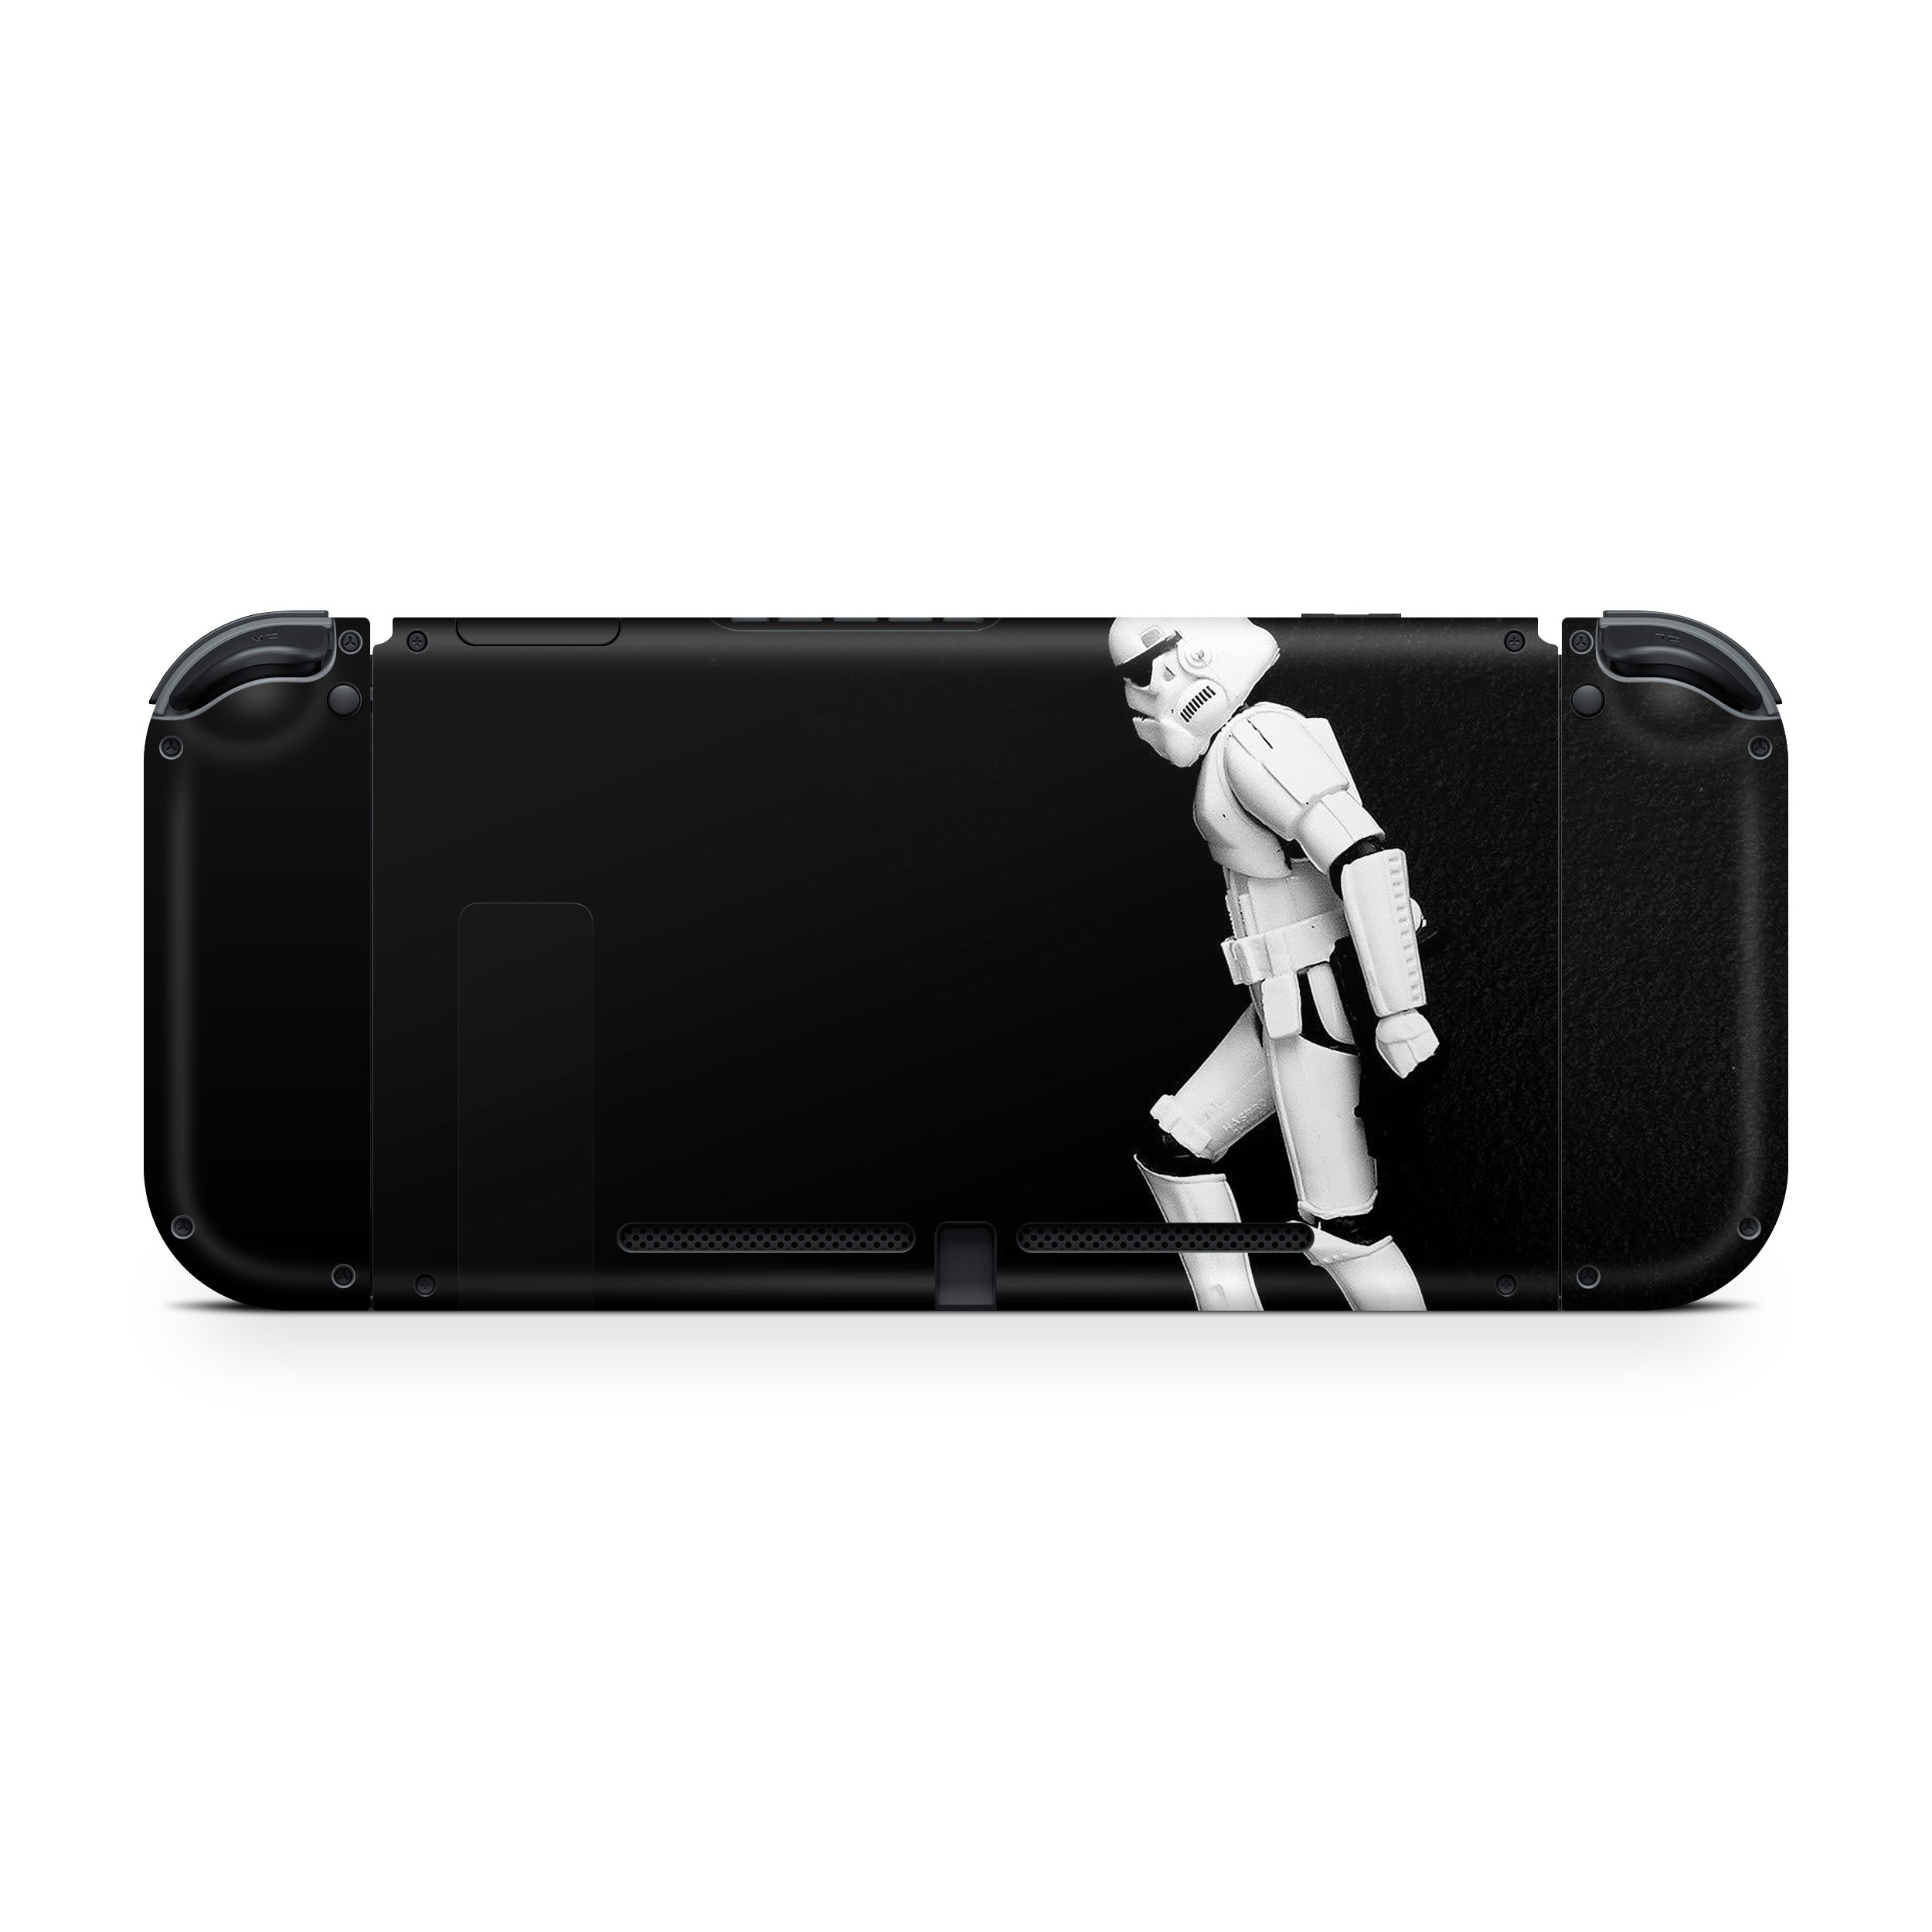 A video game skin featuring a Star Wars Storm Trooper design for the Nintendo Switch.